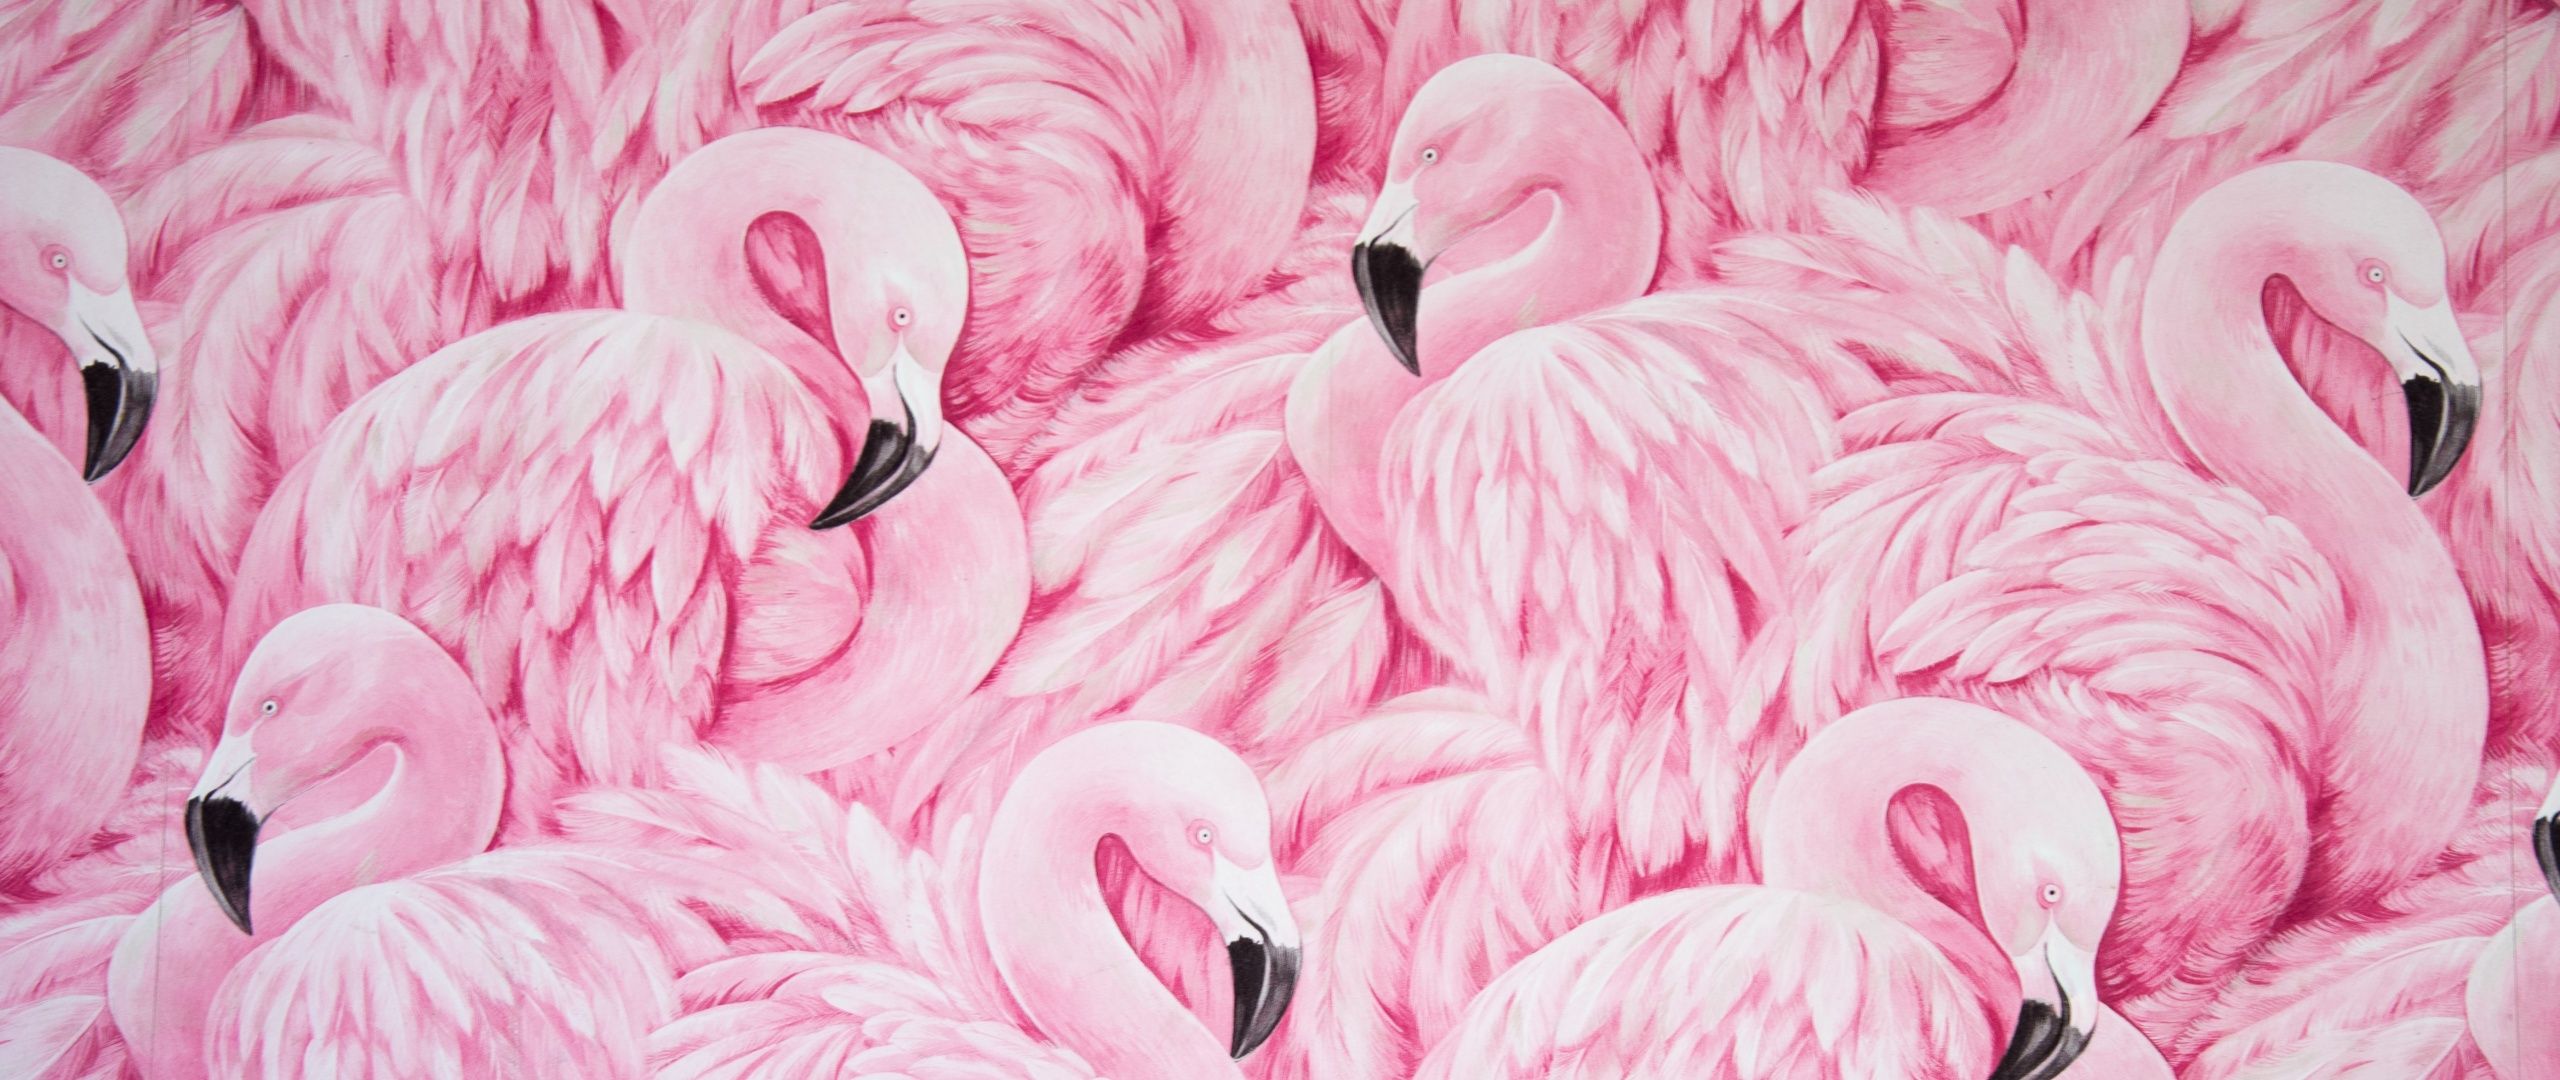 A flock of pink flamingos are standing in the water. - Flamingo, feathers